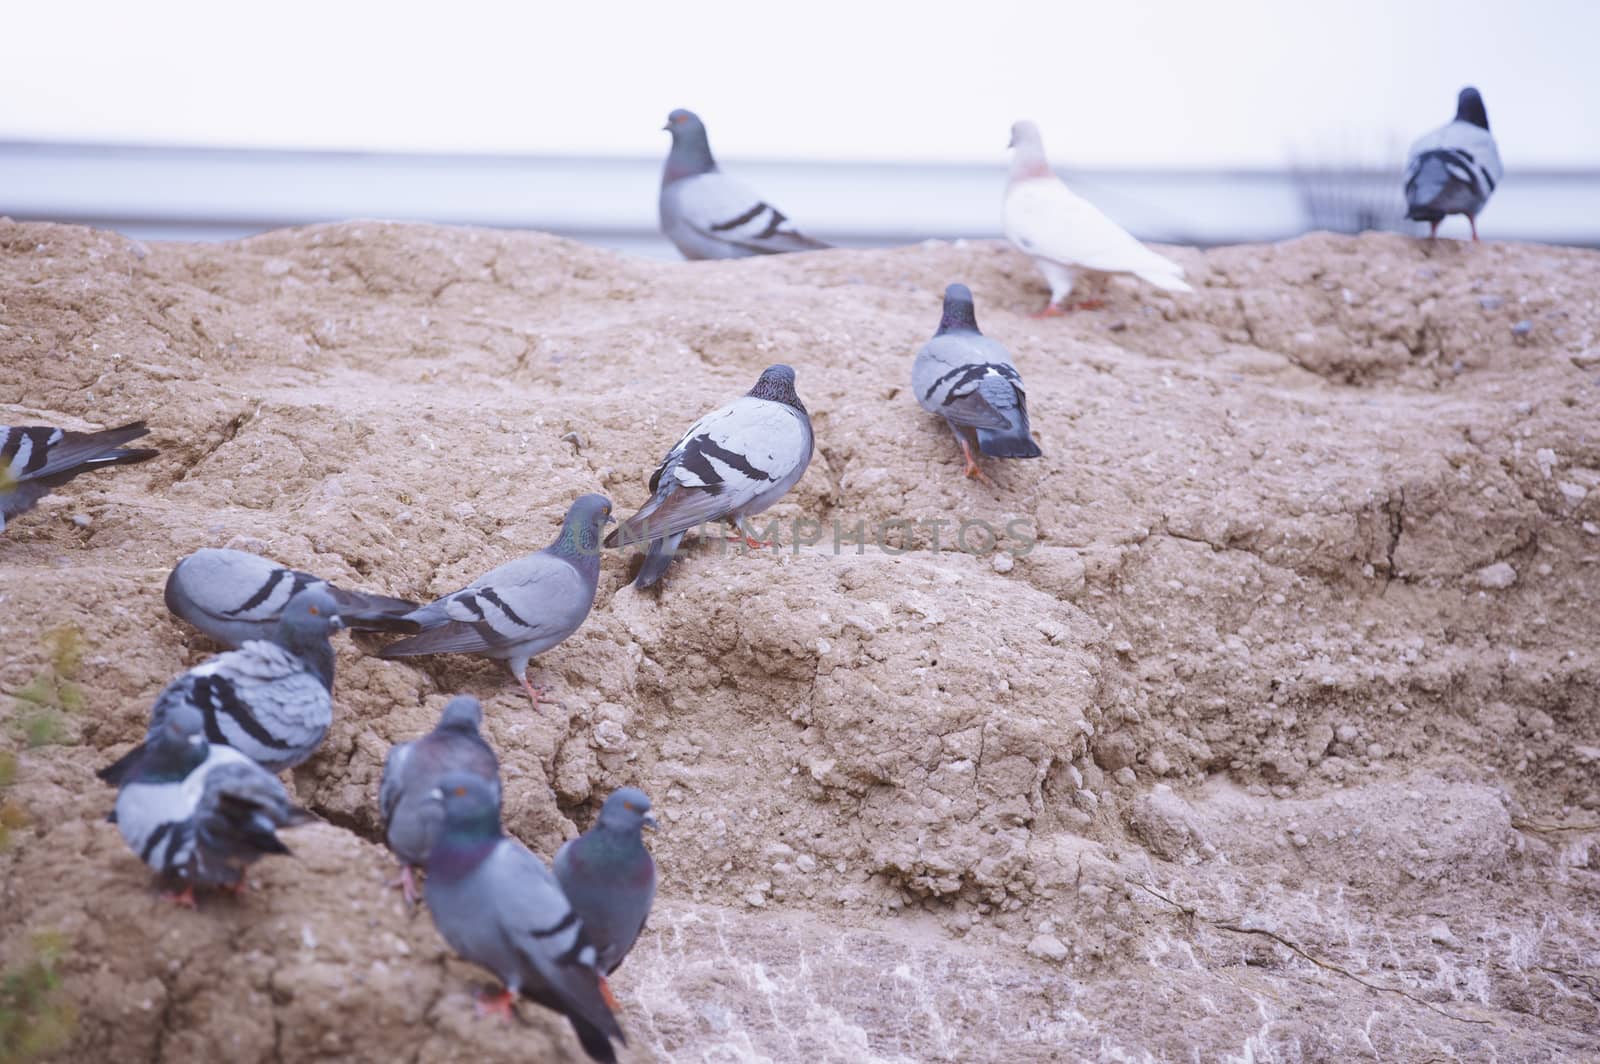 Flock of pigeons on the rock. Close-up view by Novic